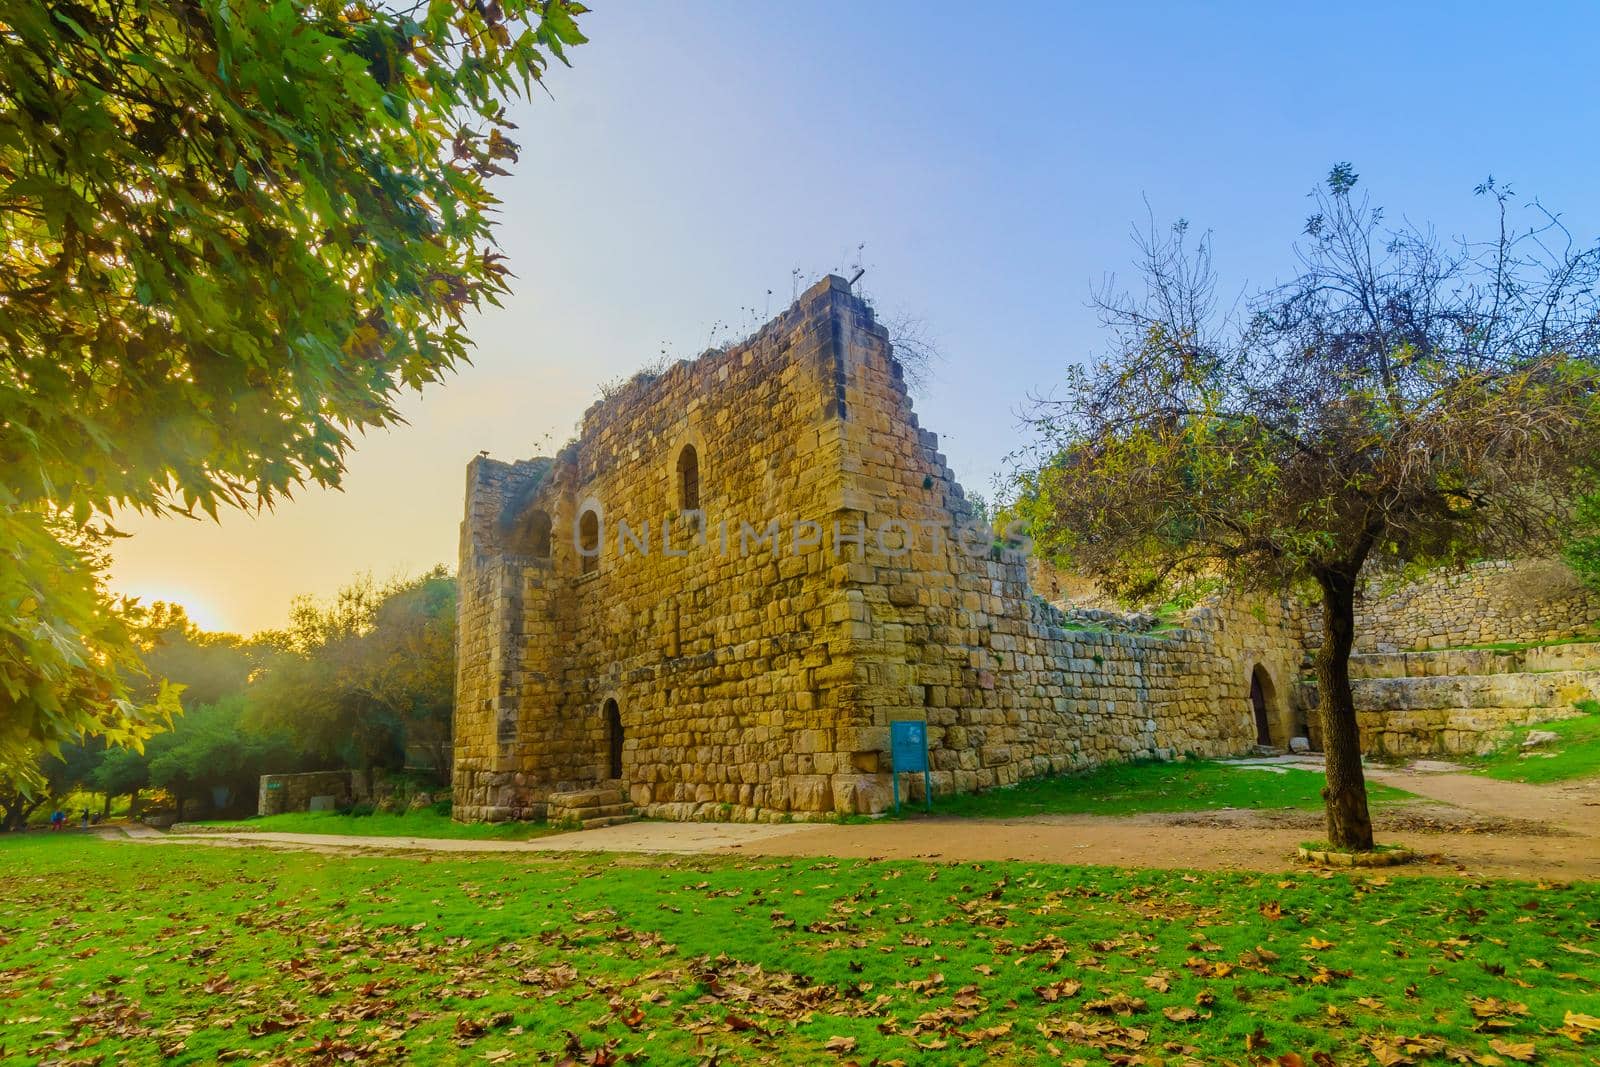 View of a Crusader farmhouse, with trees, and fall foliage in En Hemed National Park (Aqua Bella), west of Jerusalem, Israel